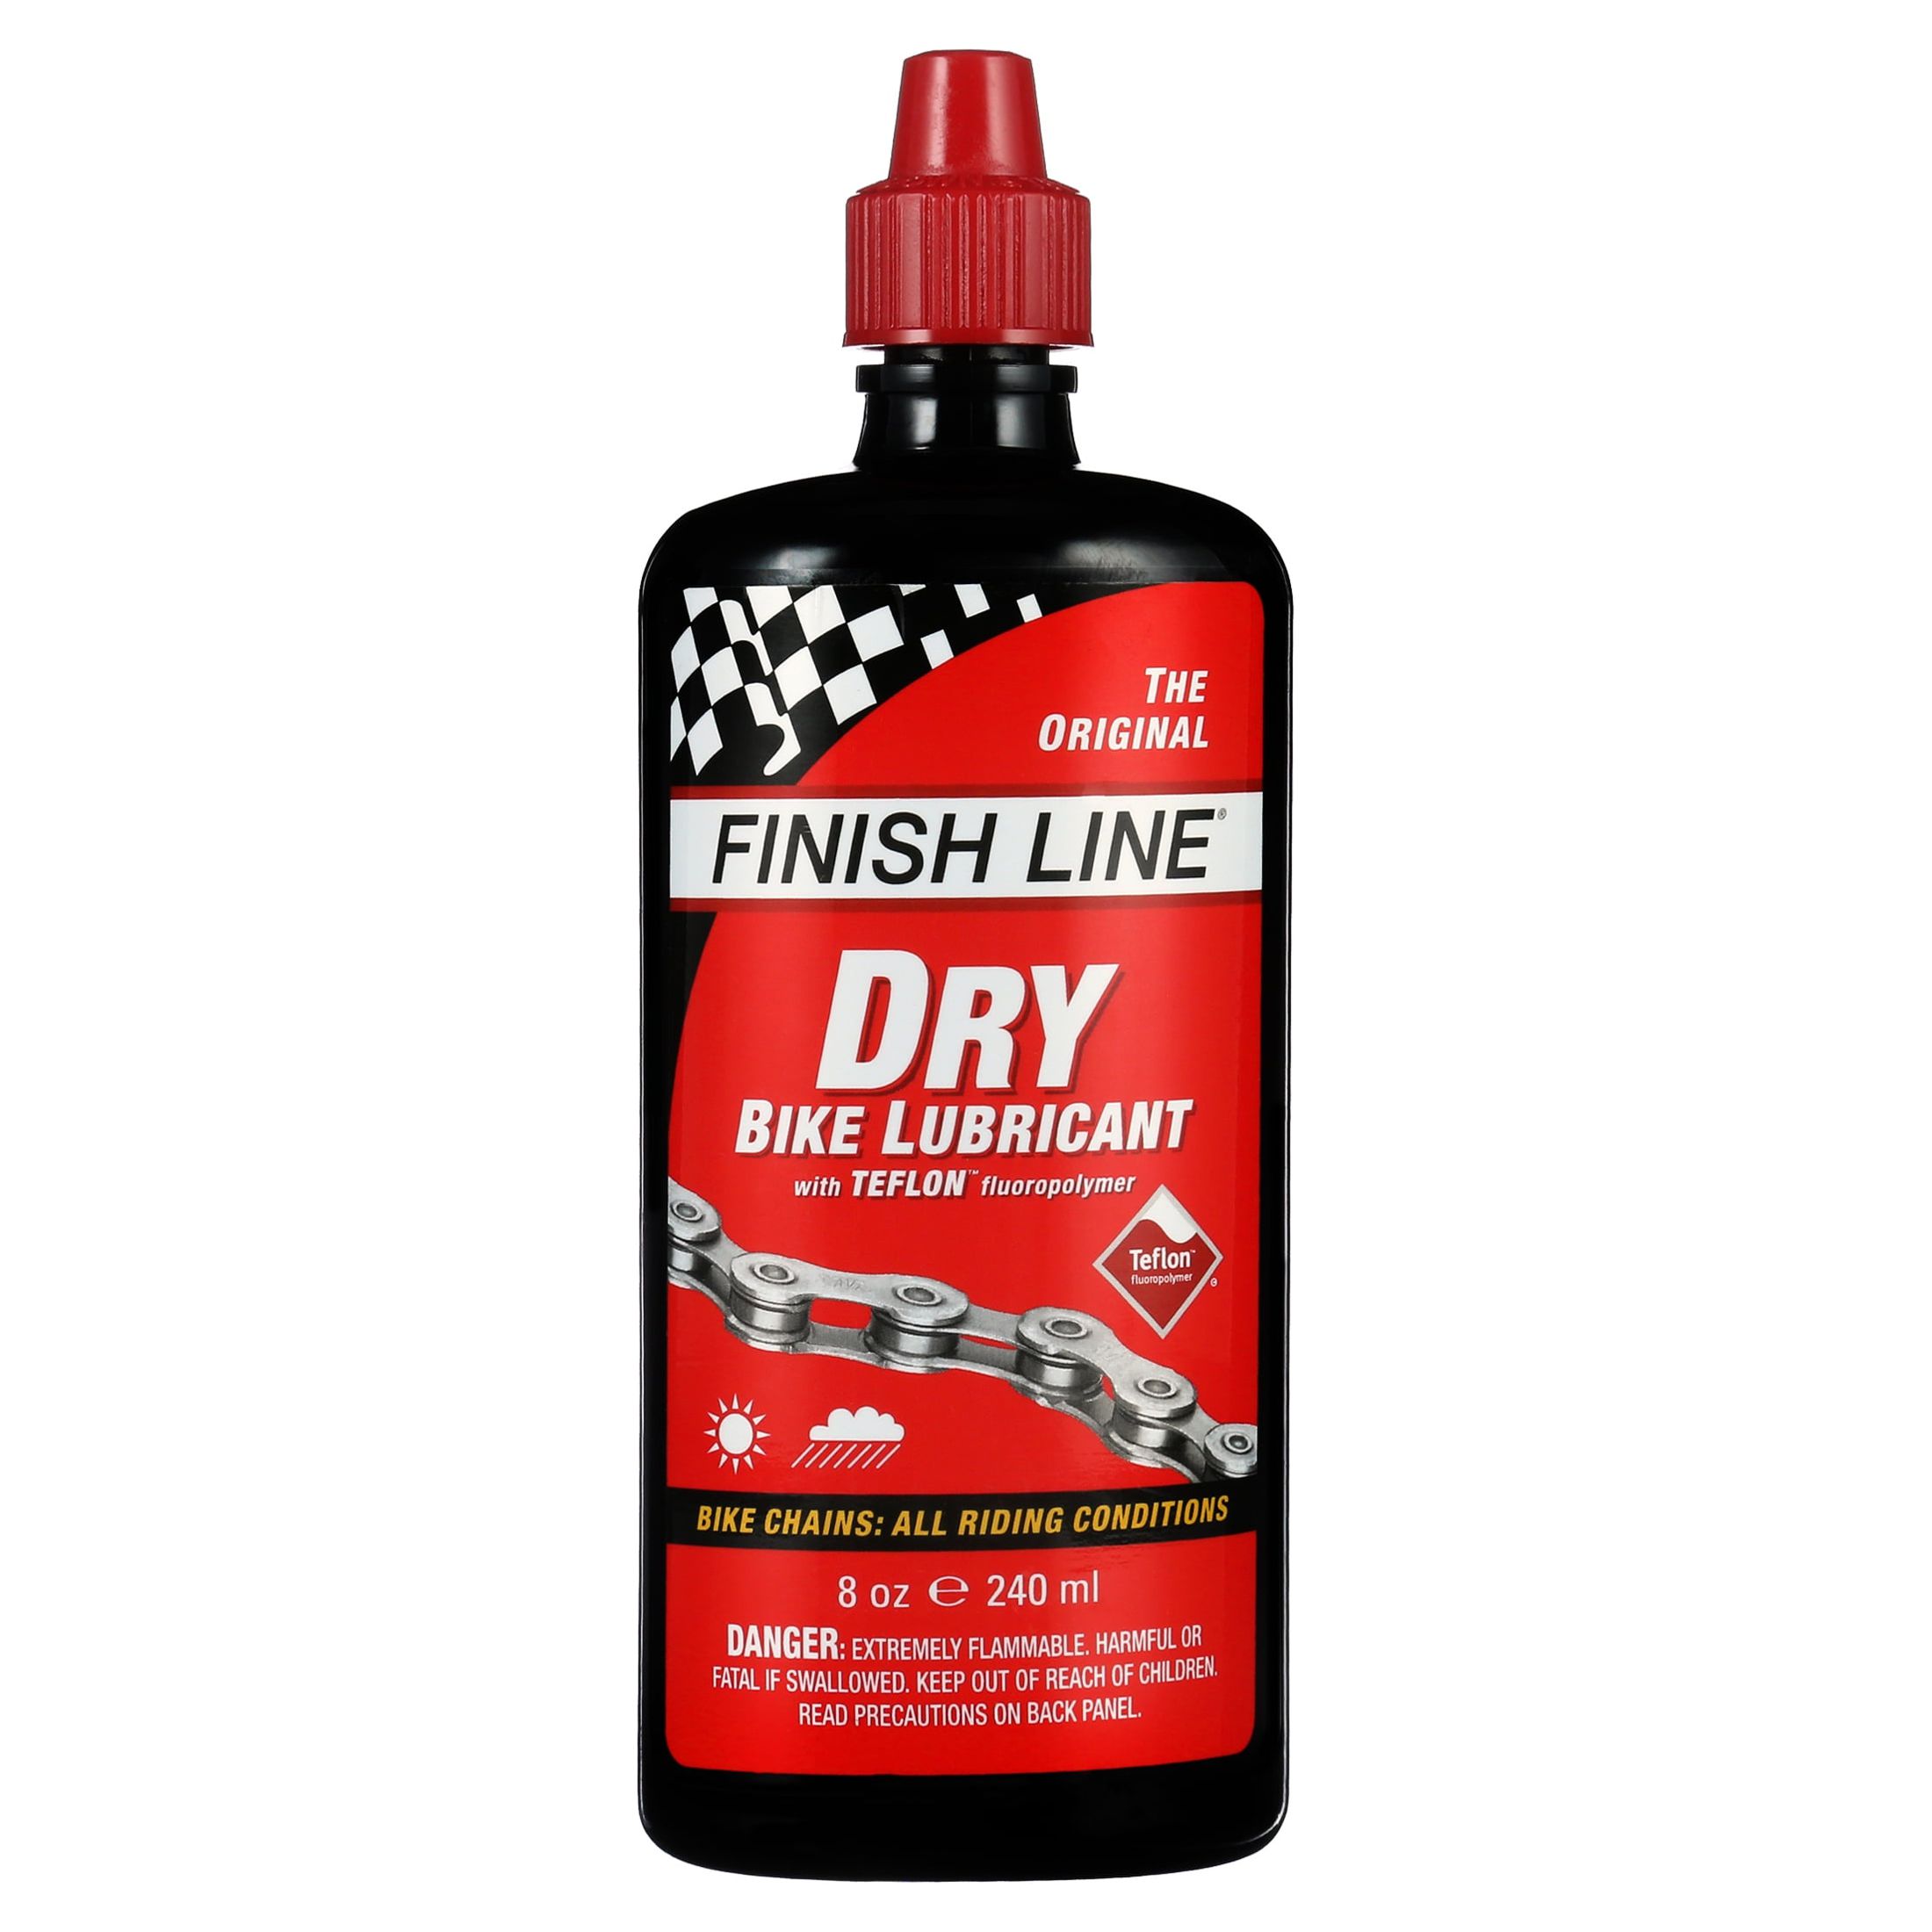 Finish Line Dry Bike Lubricant with Teflon Squeeze Bottle, 8 Oz. - image 1 of 6